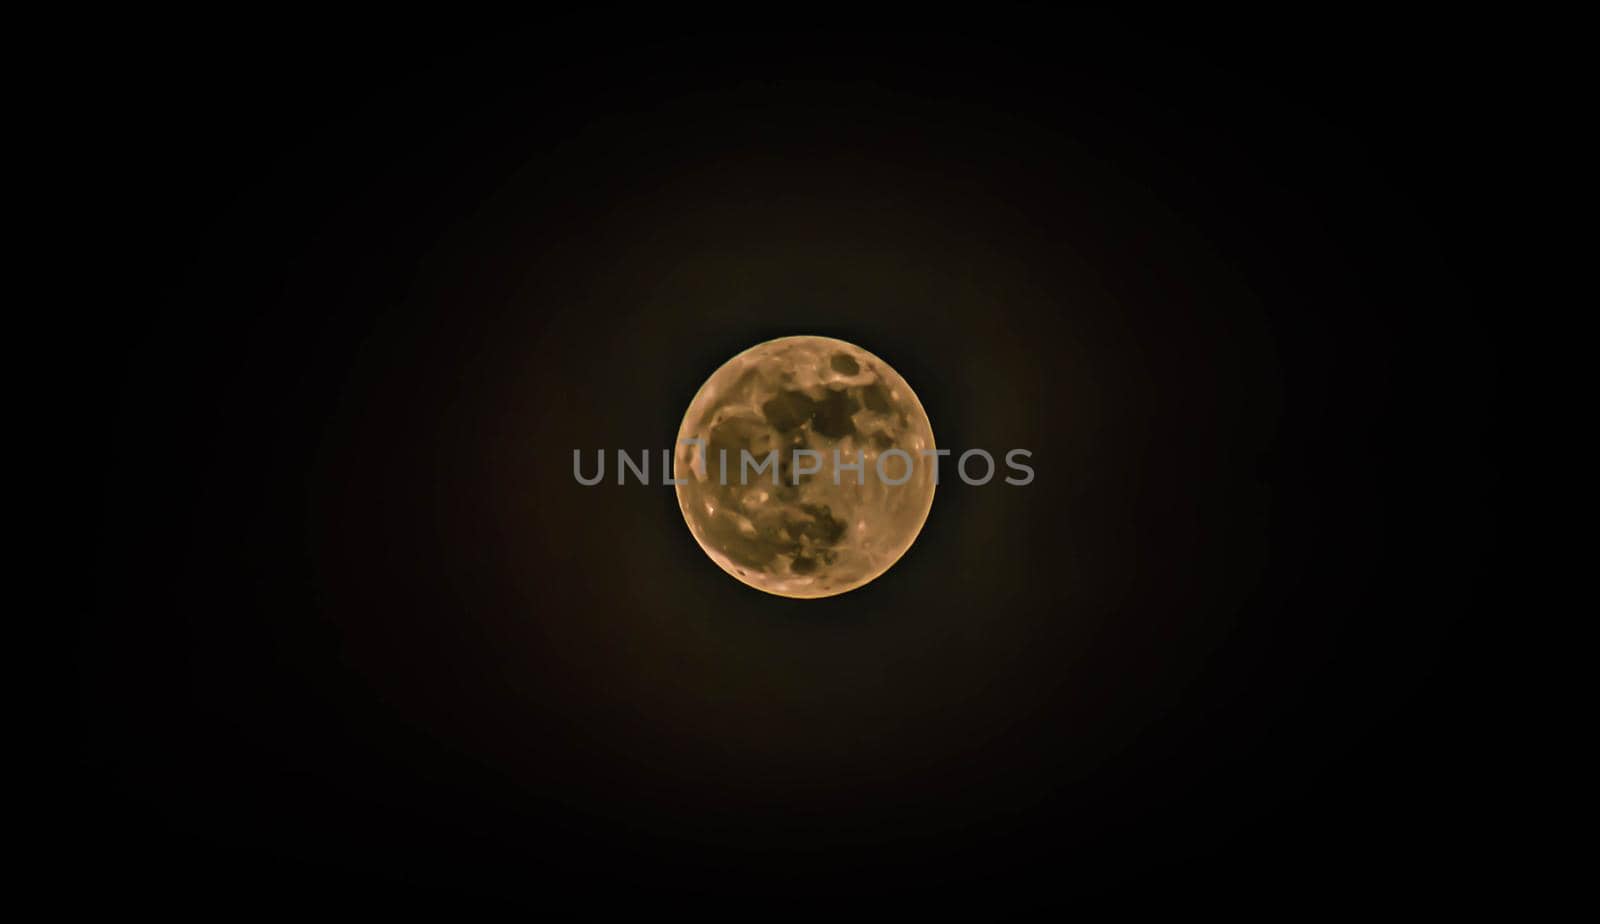 Halloween background .full moon dark cloud sky at night abstract science background by Petrichor